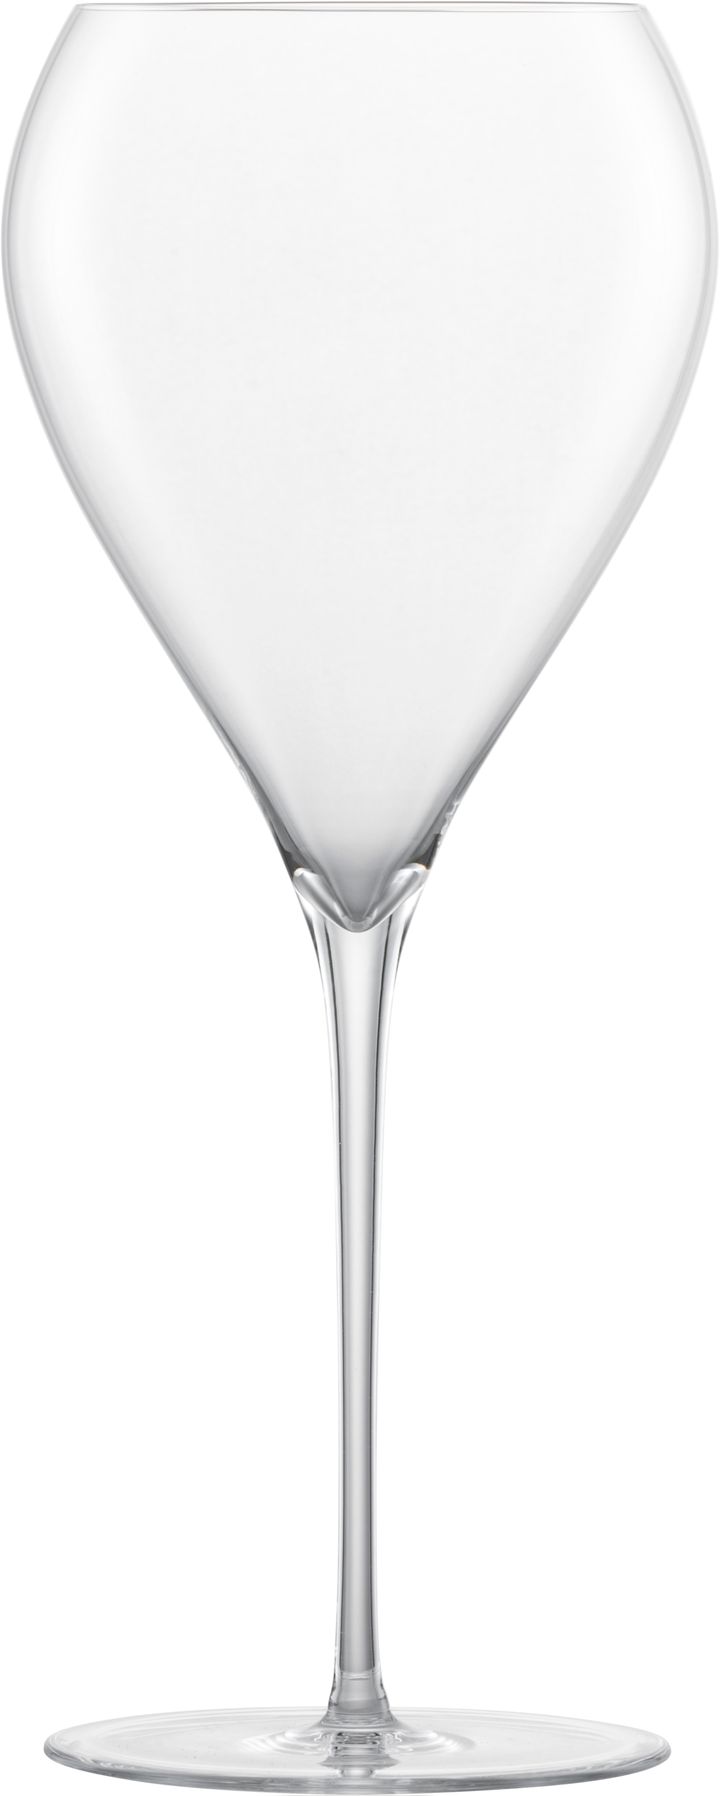 Enoteca champagne glasses, 67 cl Zwiesel